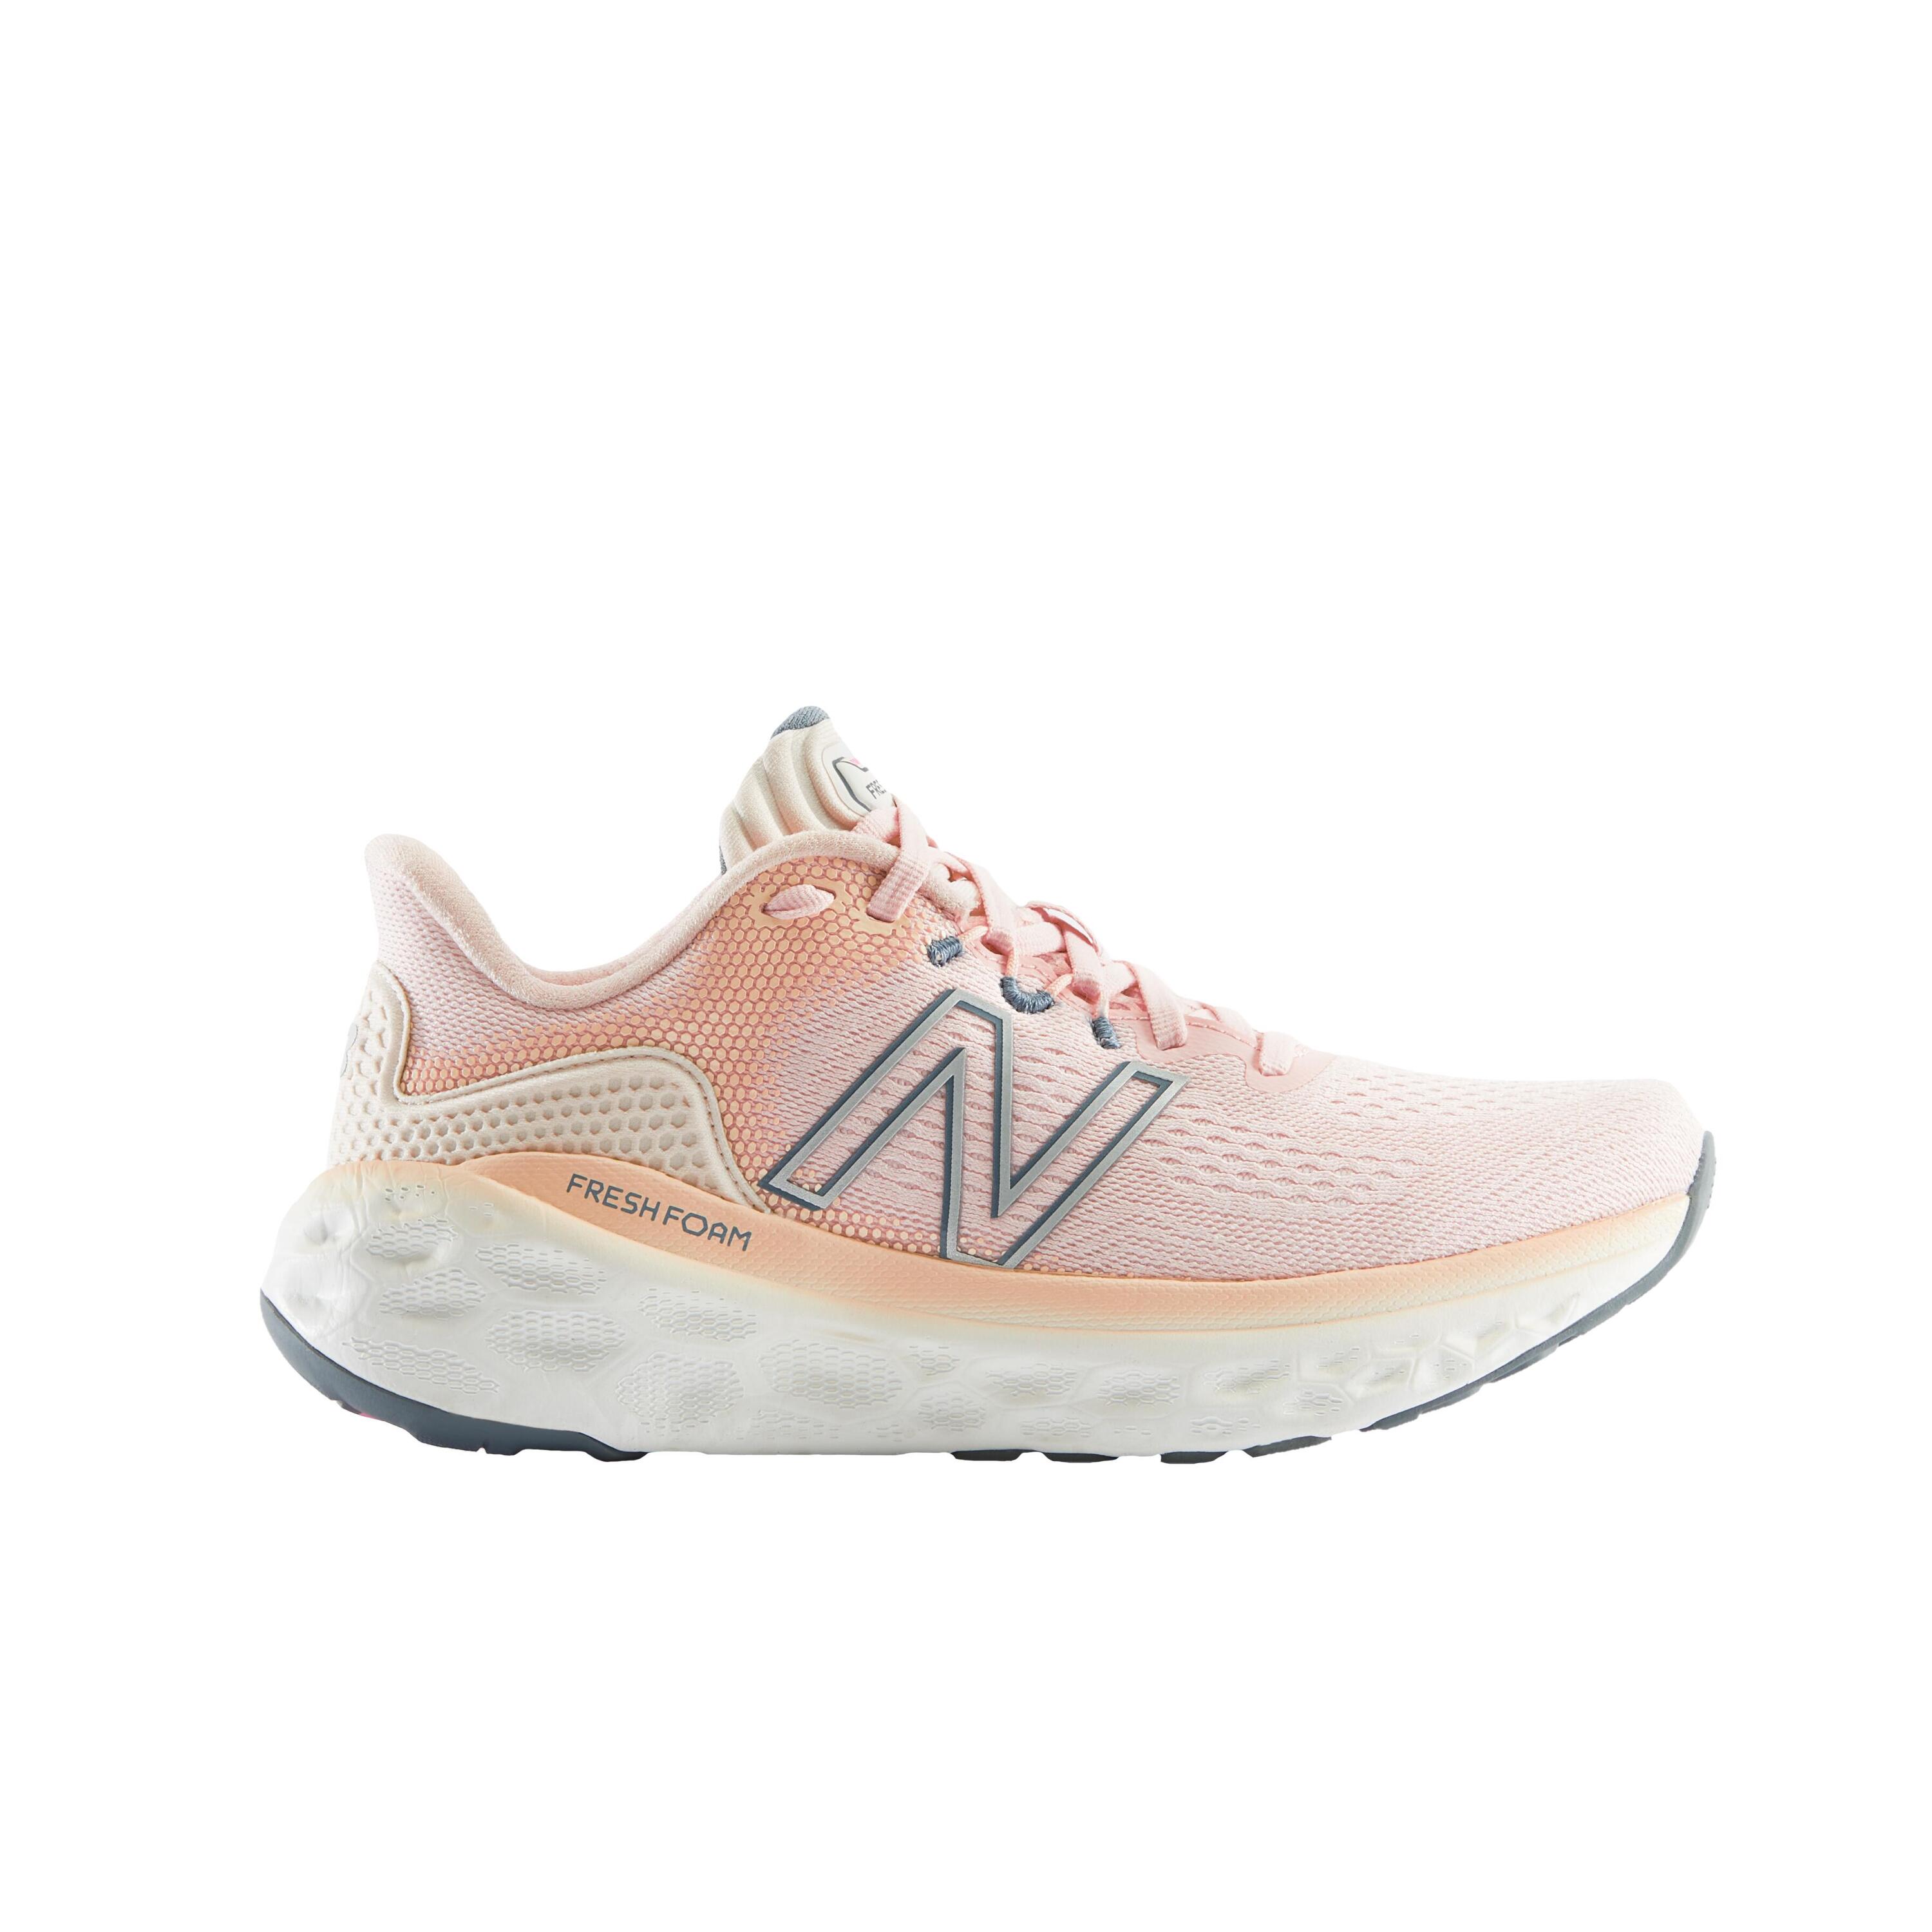 Women's Running Shoes New Balance More V3 - pink 8/8